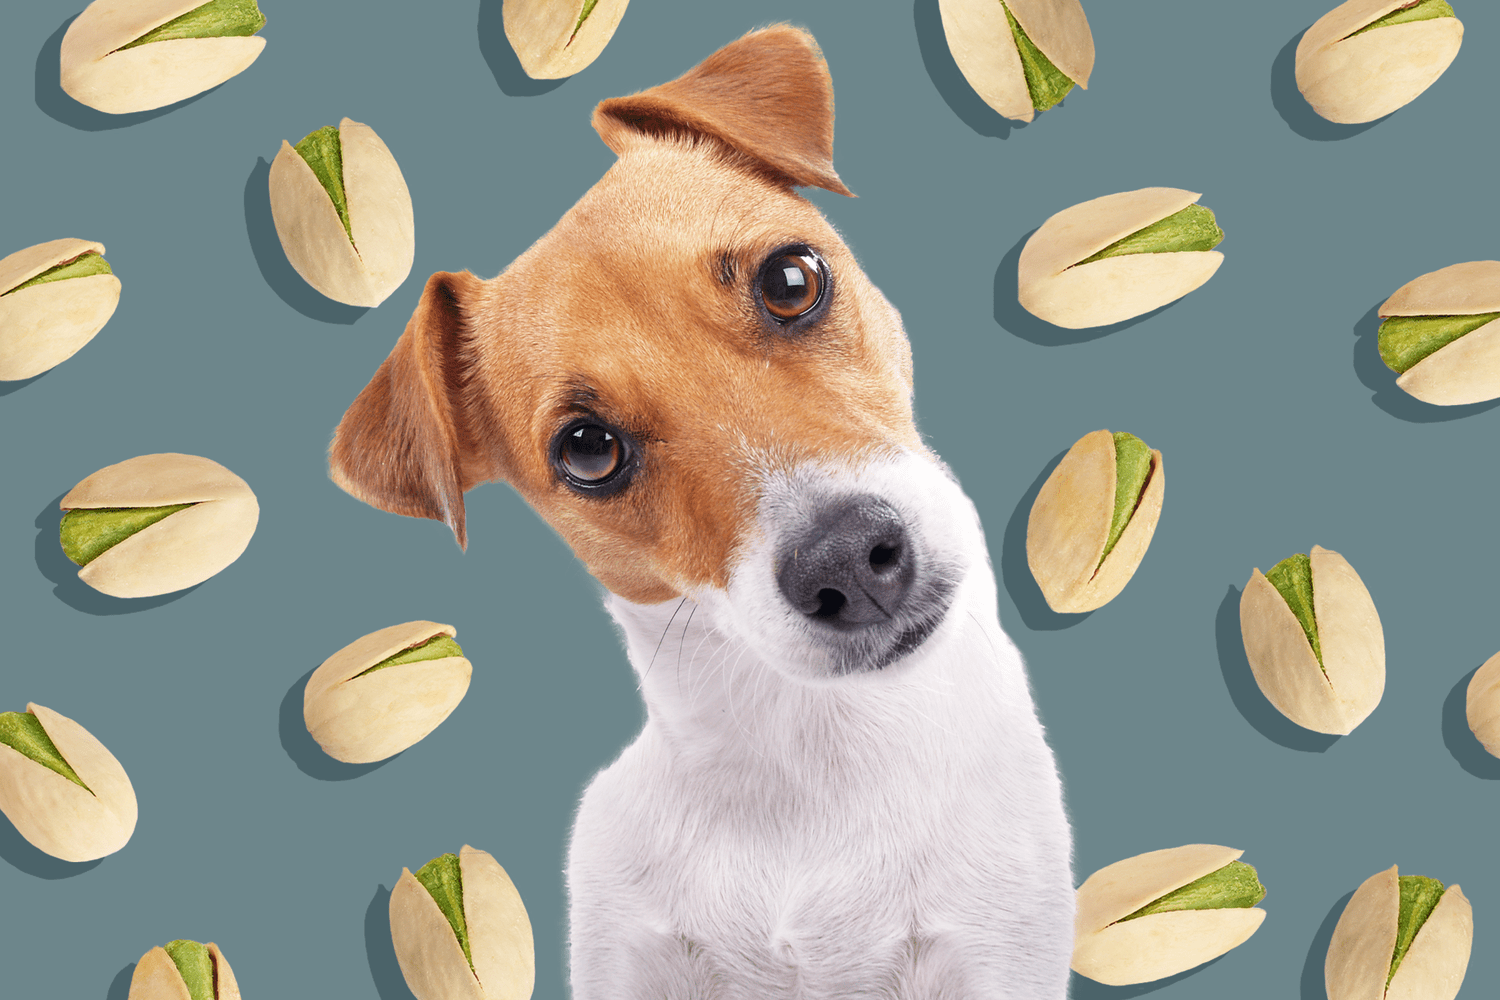 Reasons why pistachios are an excellent treat for Fido